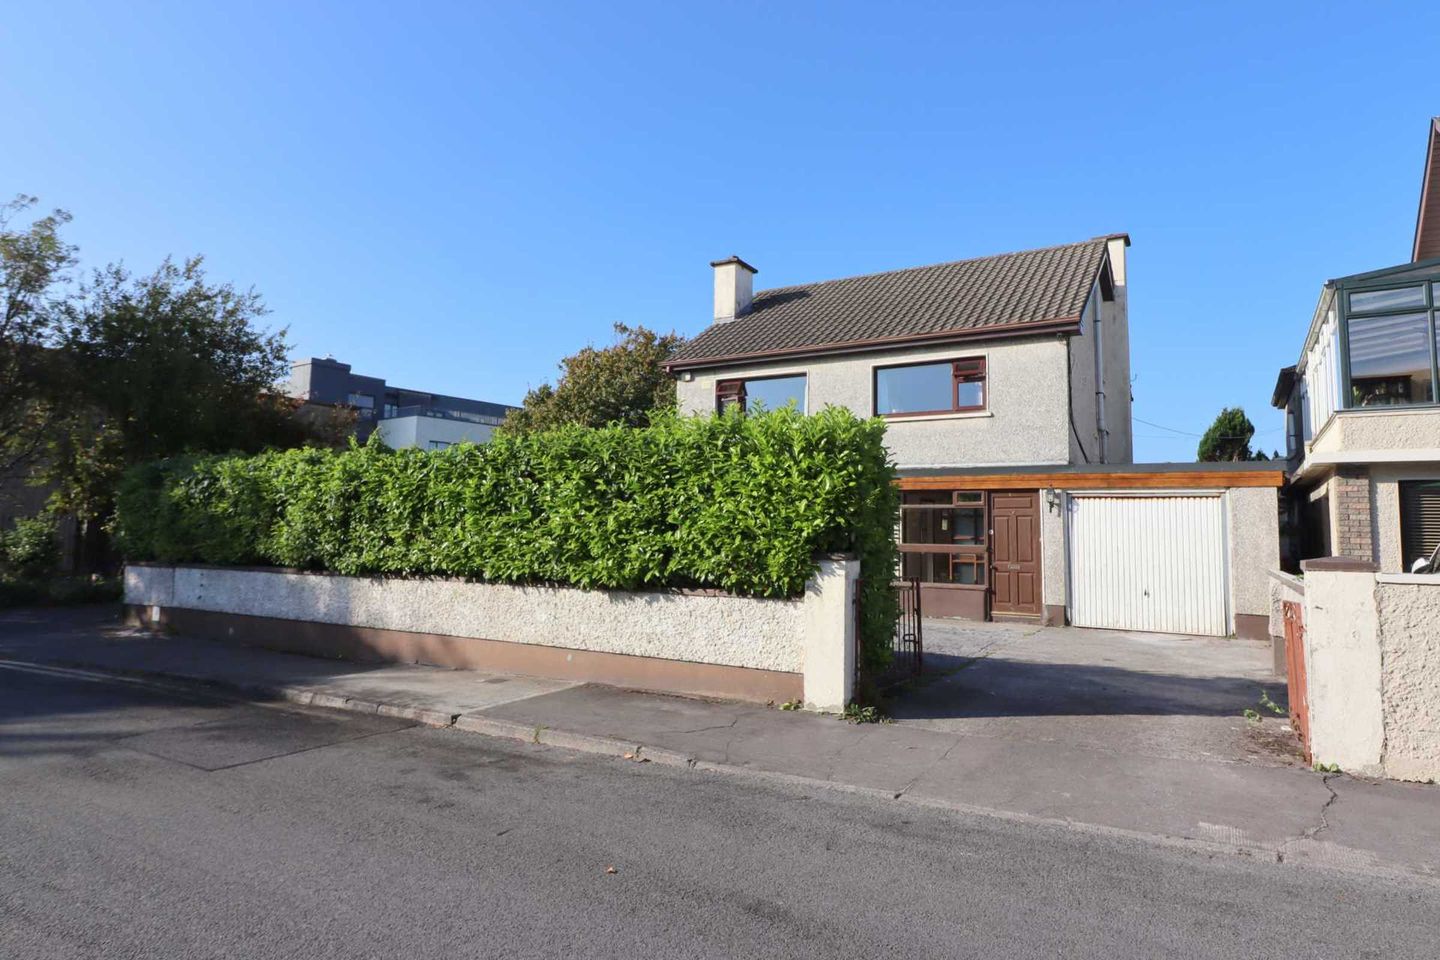 54 Glenina Heights, Renmore, Co. Galway, H91YDX5